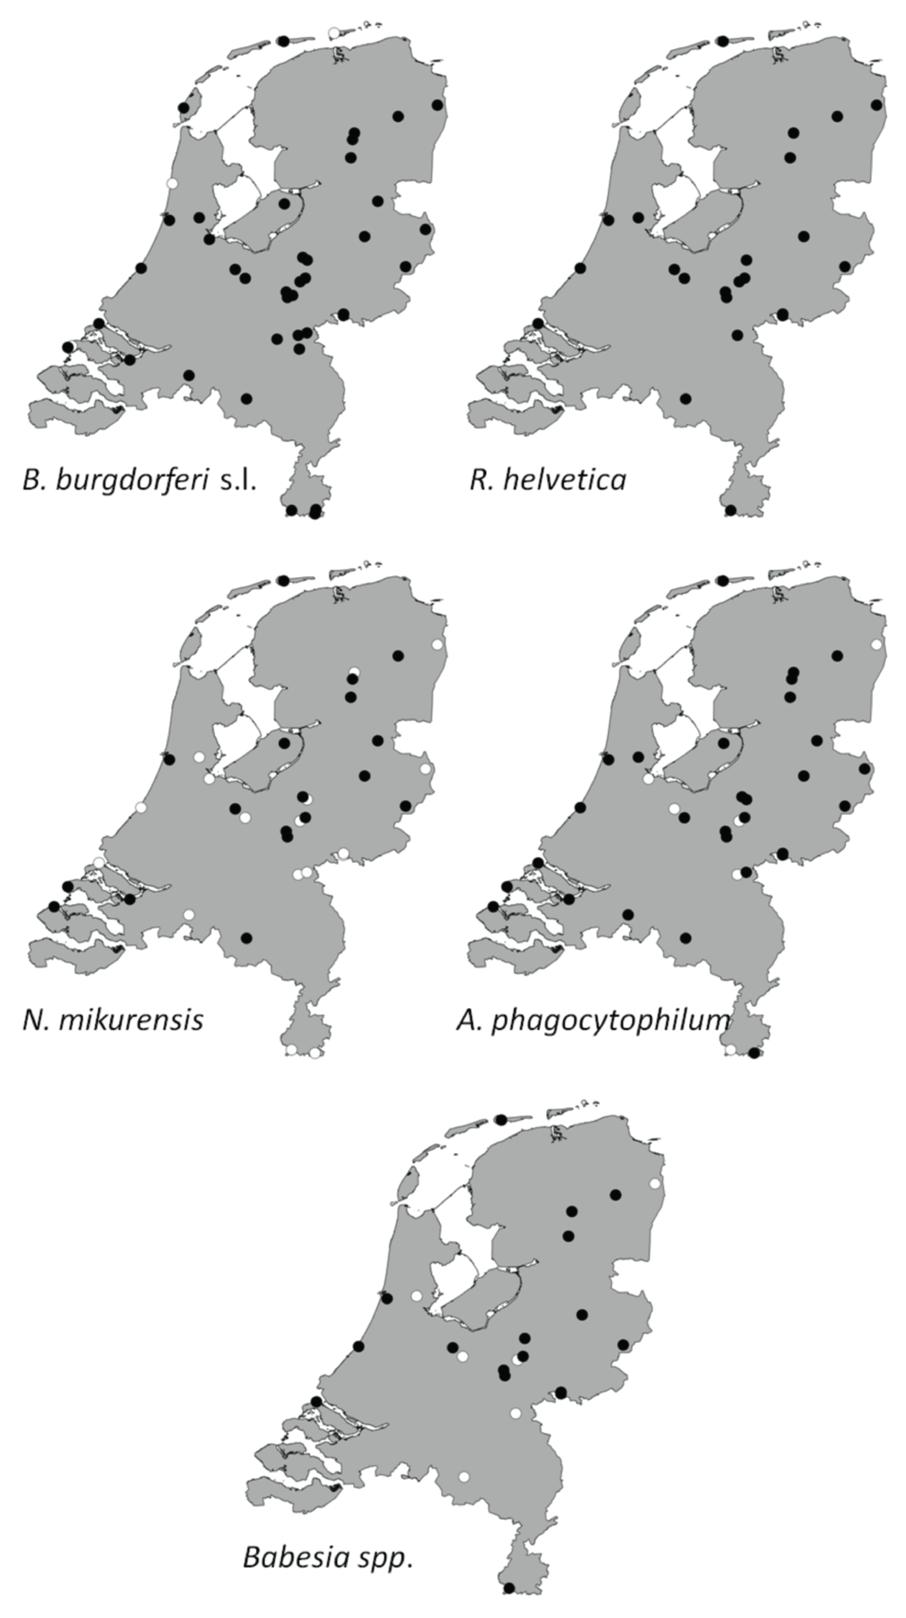 CHAPTER 2 Spatiotemporal dynamics of emerging pathogens in questing Ixodes ricinus 2 Figure 1: Aggregated presence/absence map of questing I. ricinus nymphs/adults infected with B. burgdorferi s.l. (A), R.